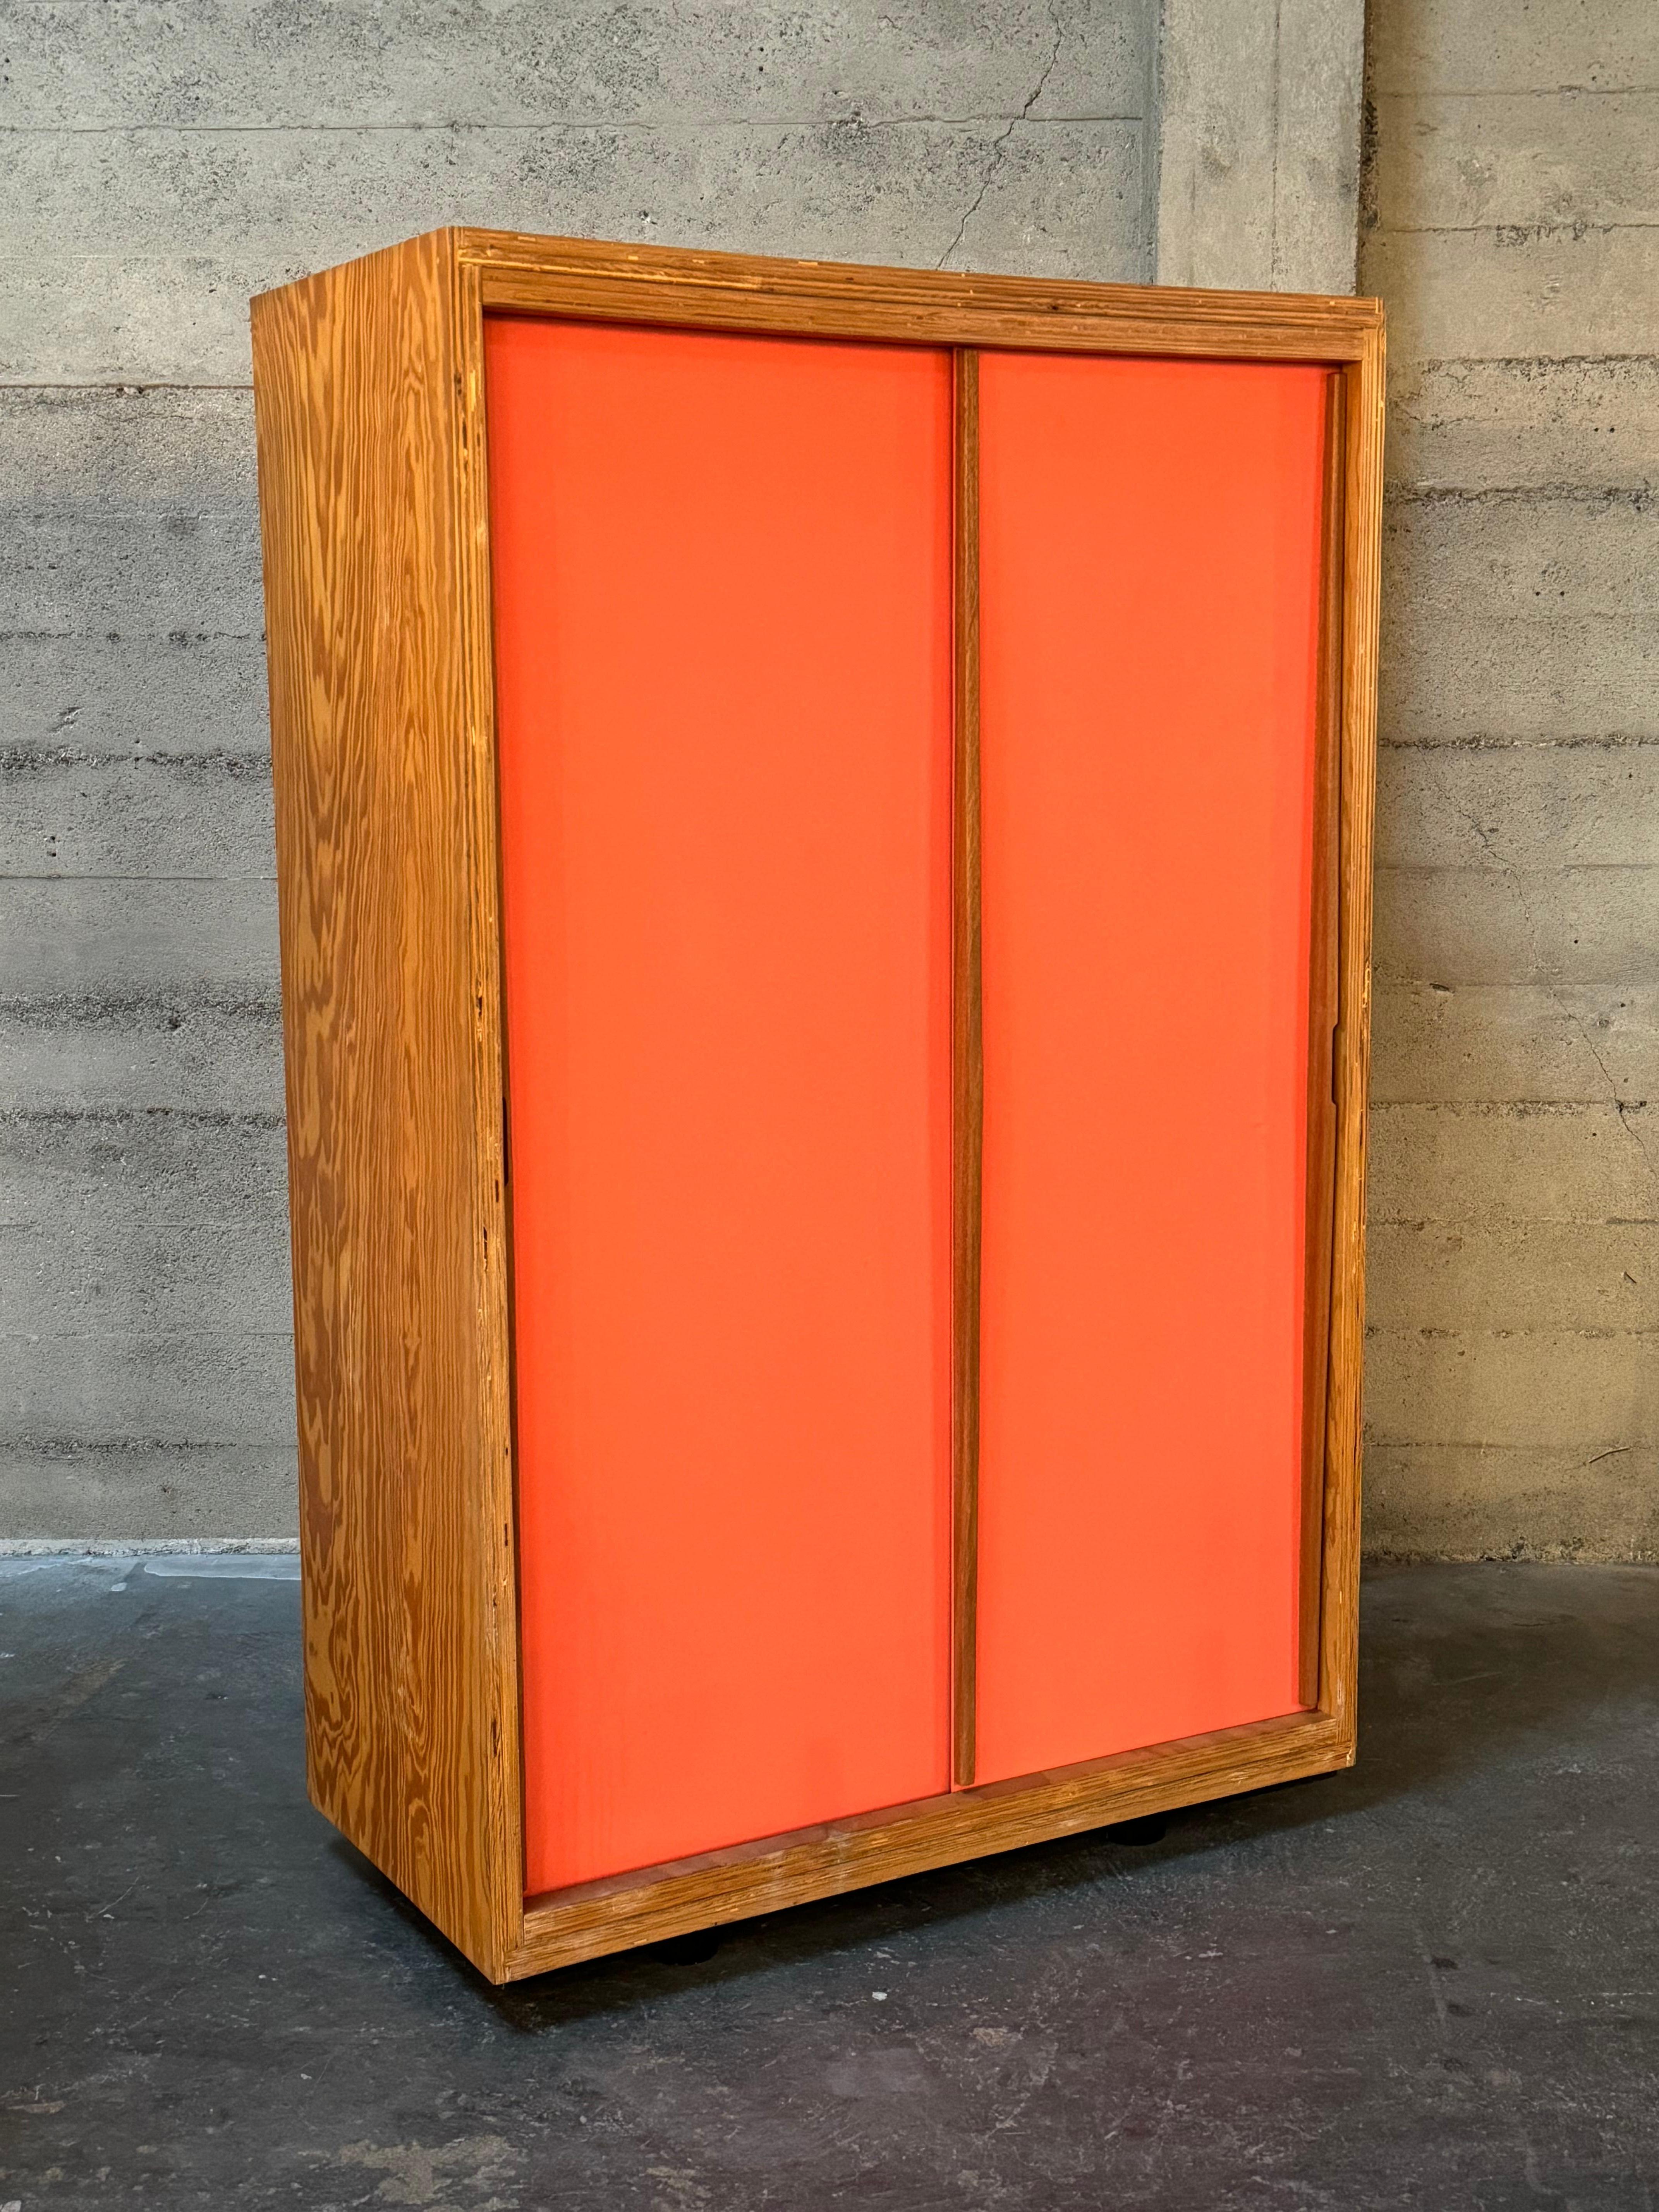 Jean Prouve style cabinets constructed of high grade figurative plywood. With a statuesque present and scale, a true and unique stand out. The two sliding doors are in a salmon pink color with pulls that extend from top to bottom of the cabinet and